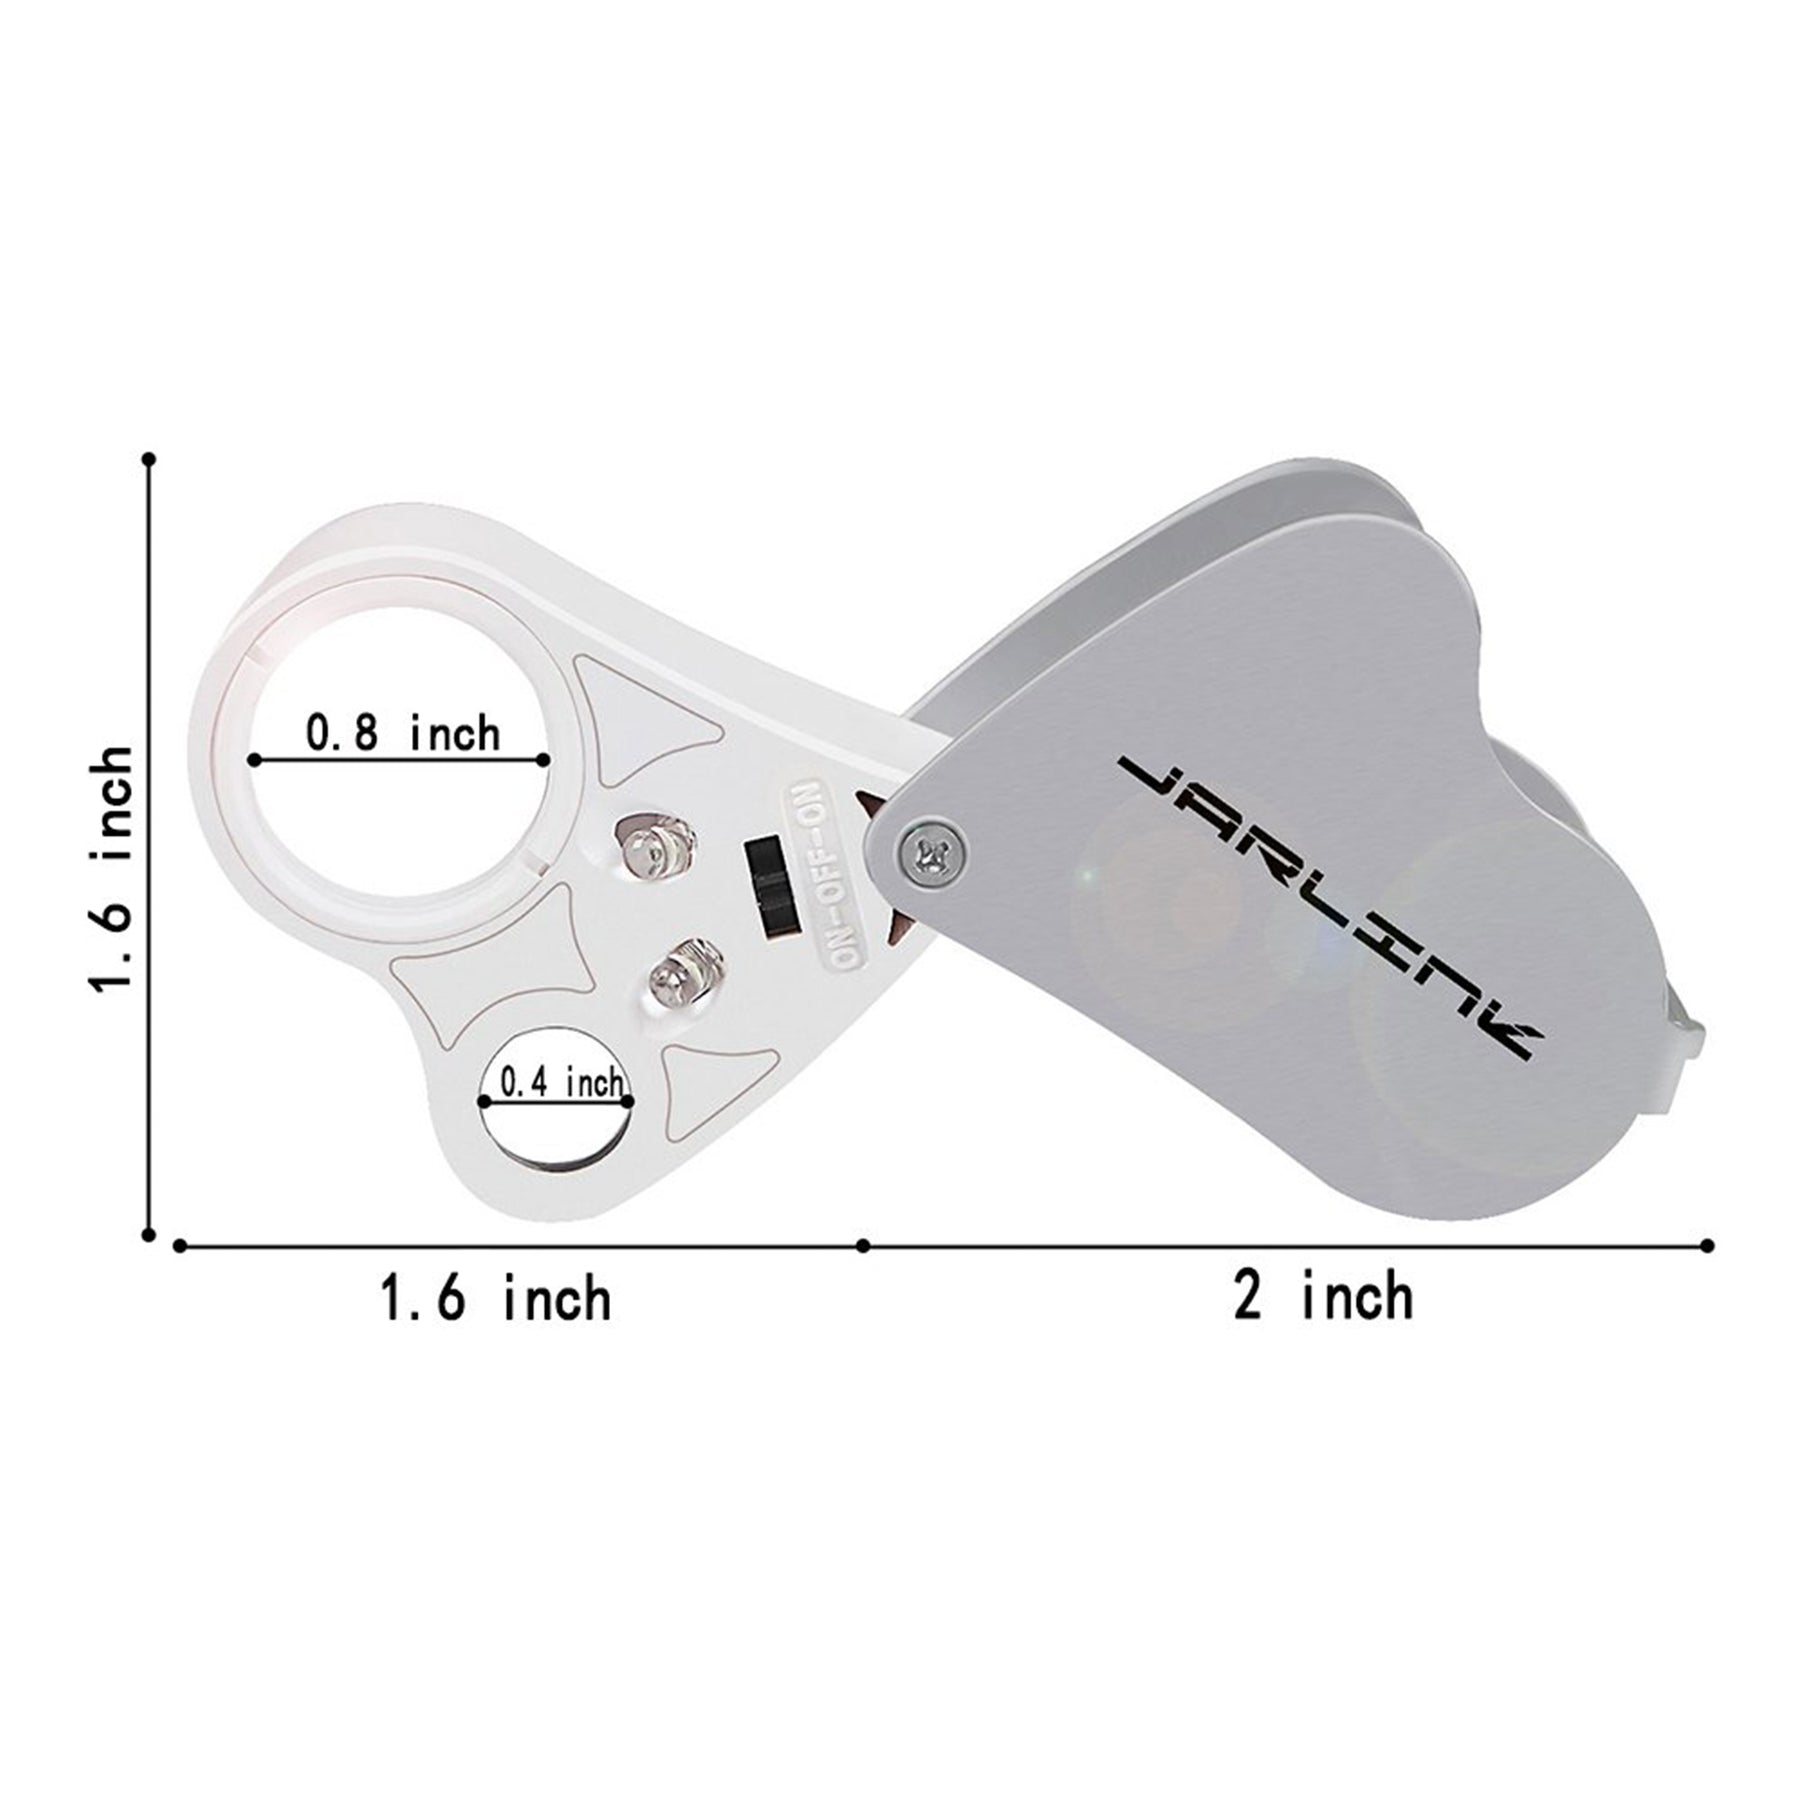 JARLINK 30X 60X Illuminated Jewelers Eye Loupe Magnifier Foldable Jewelry Magnifier with Bright LED Light for Gems Jewelry Coins Stamps Etc